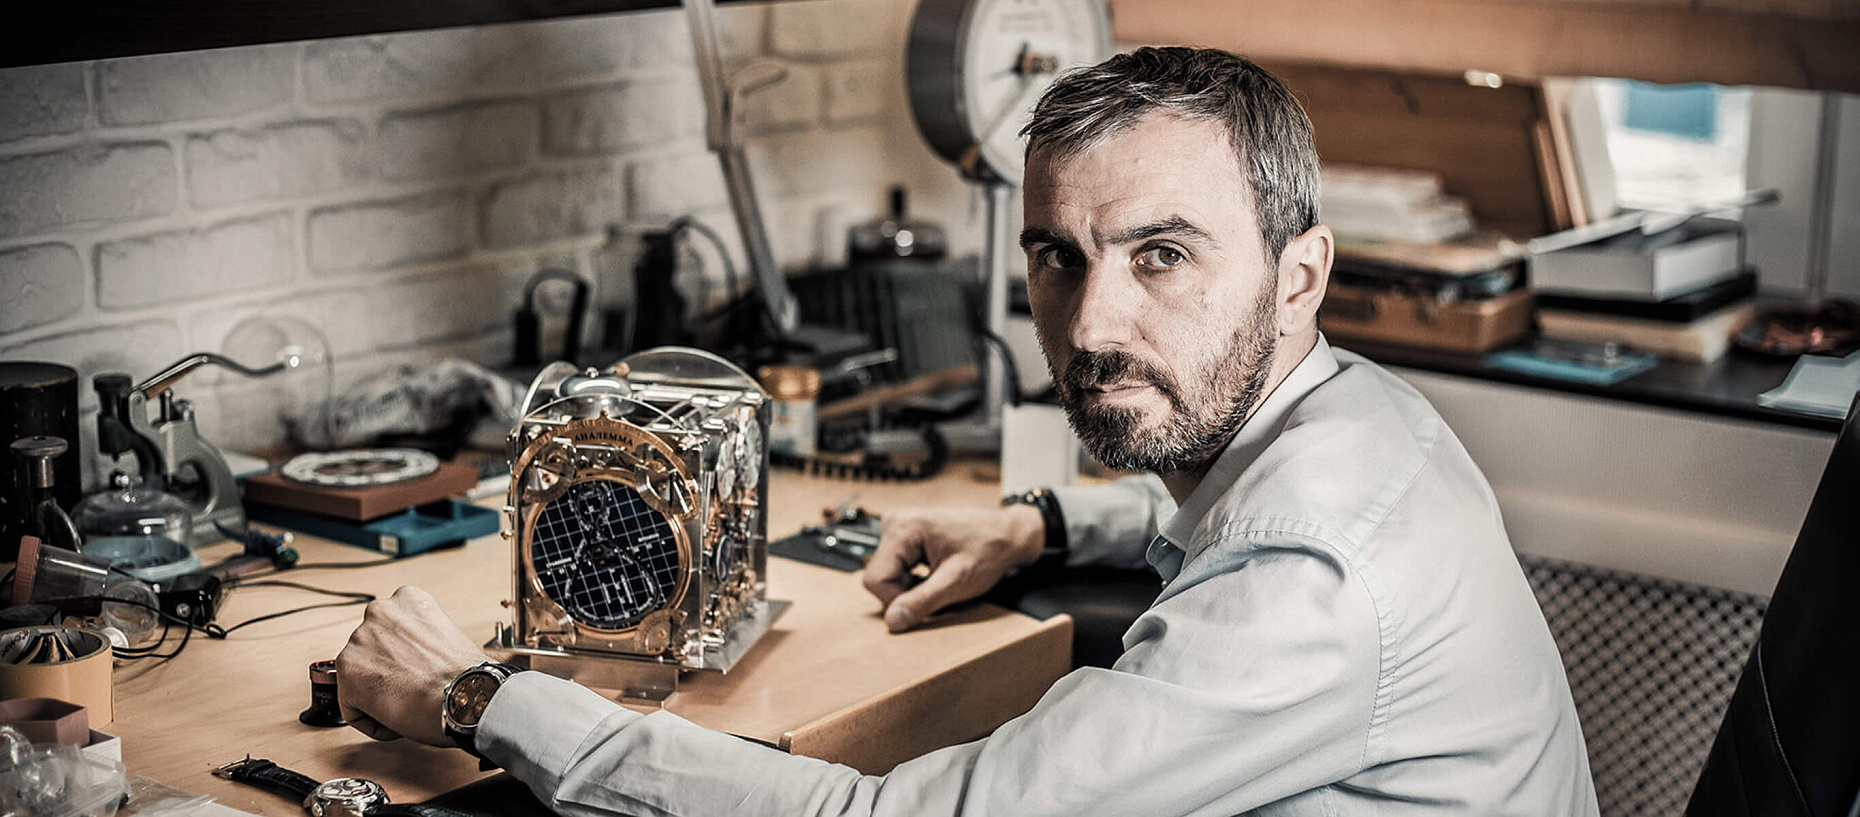 The Great 7: the most famous inventions of Russian watchmaker Konstantin Chaykin.